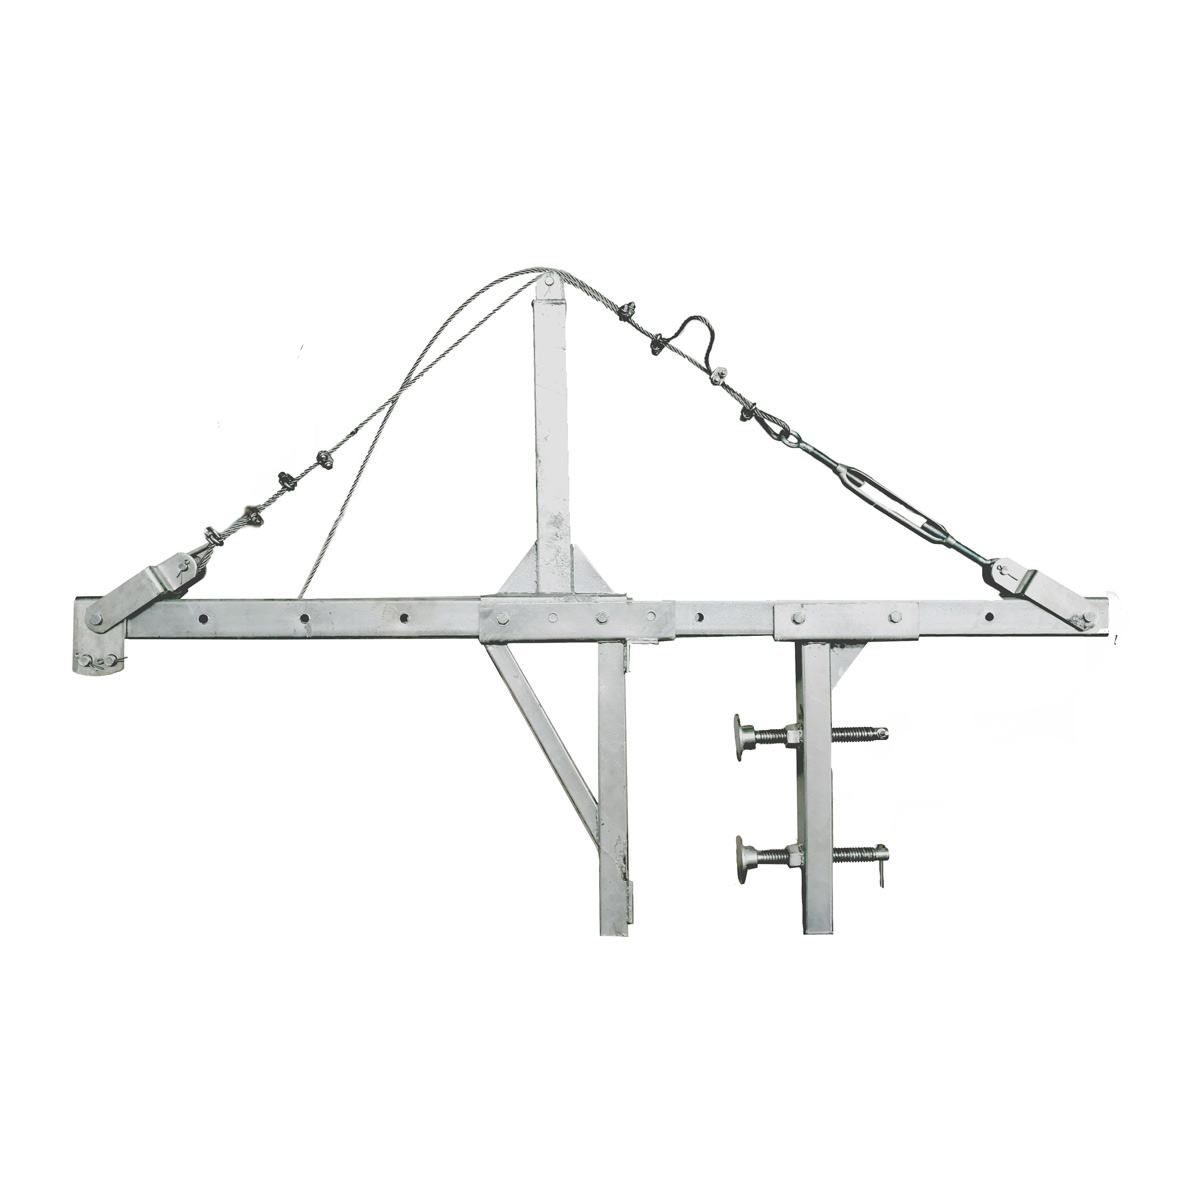 Suspended rope Platform ZLP630 Construction cradles Parapet type or counterweight type